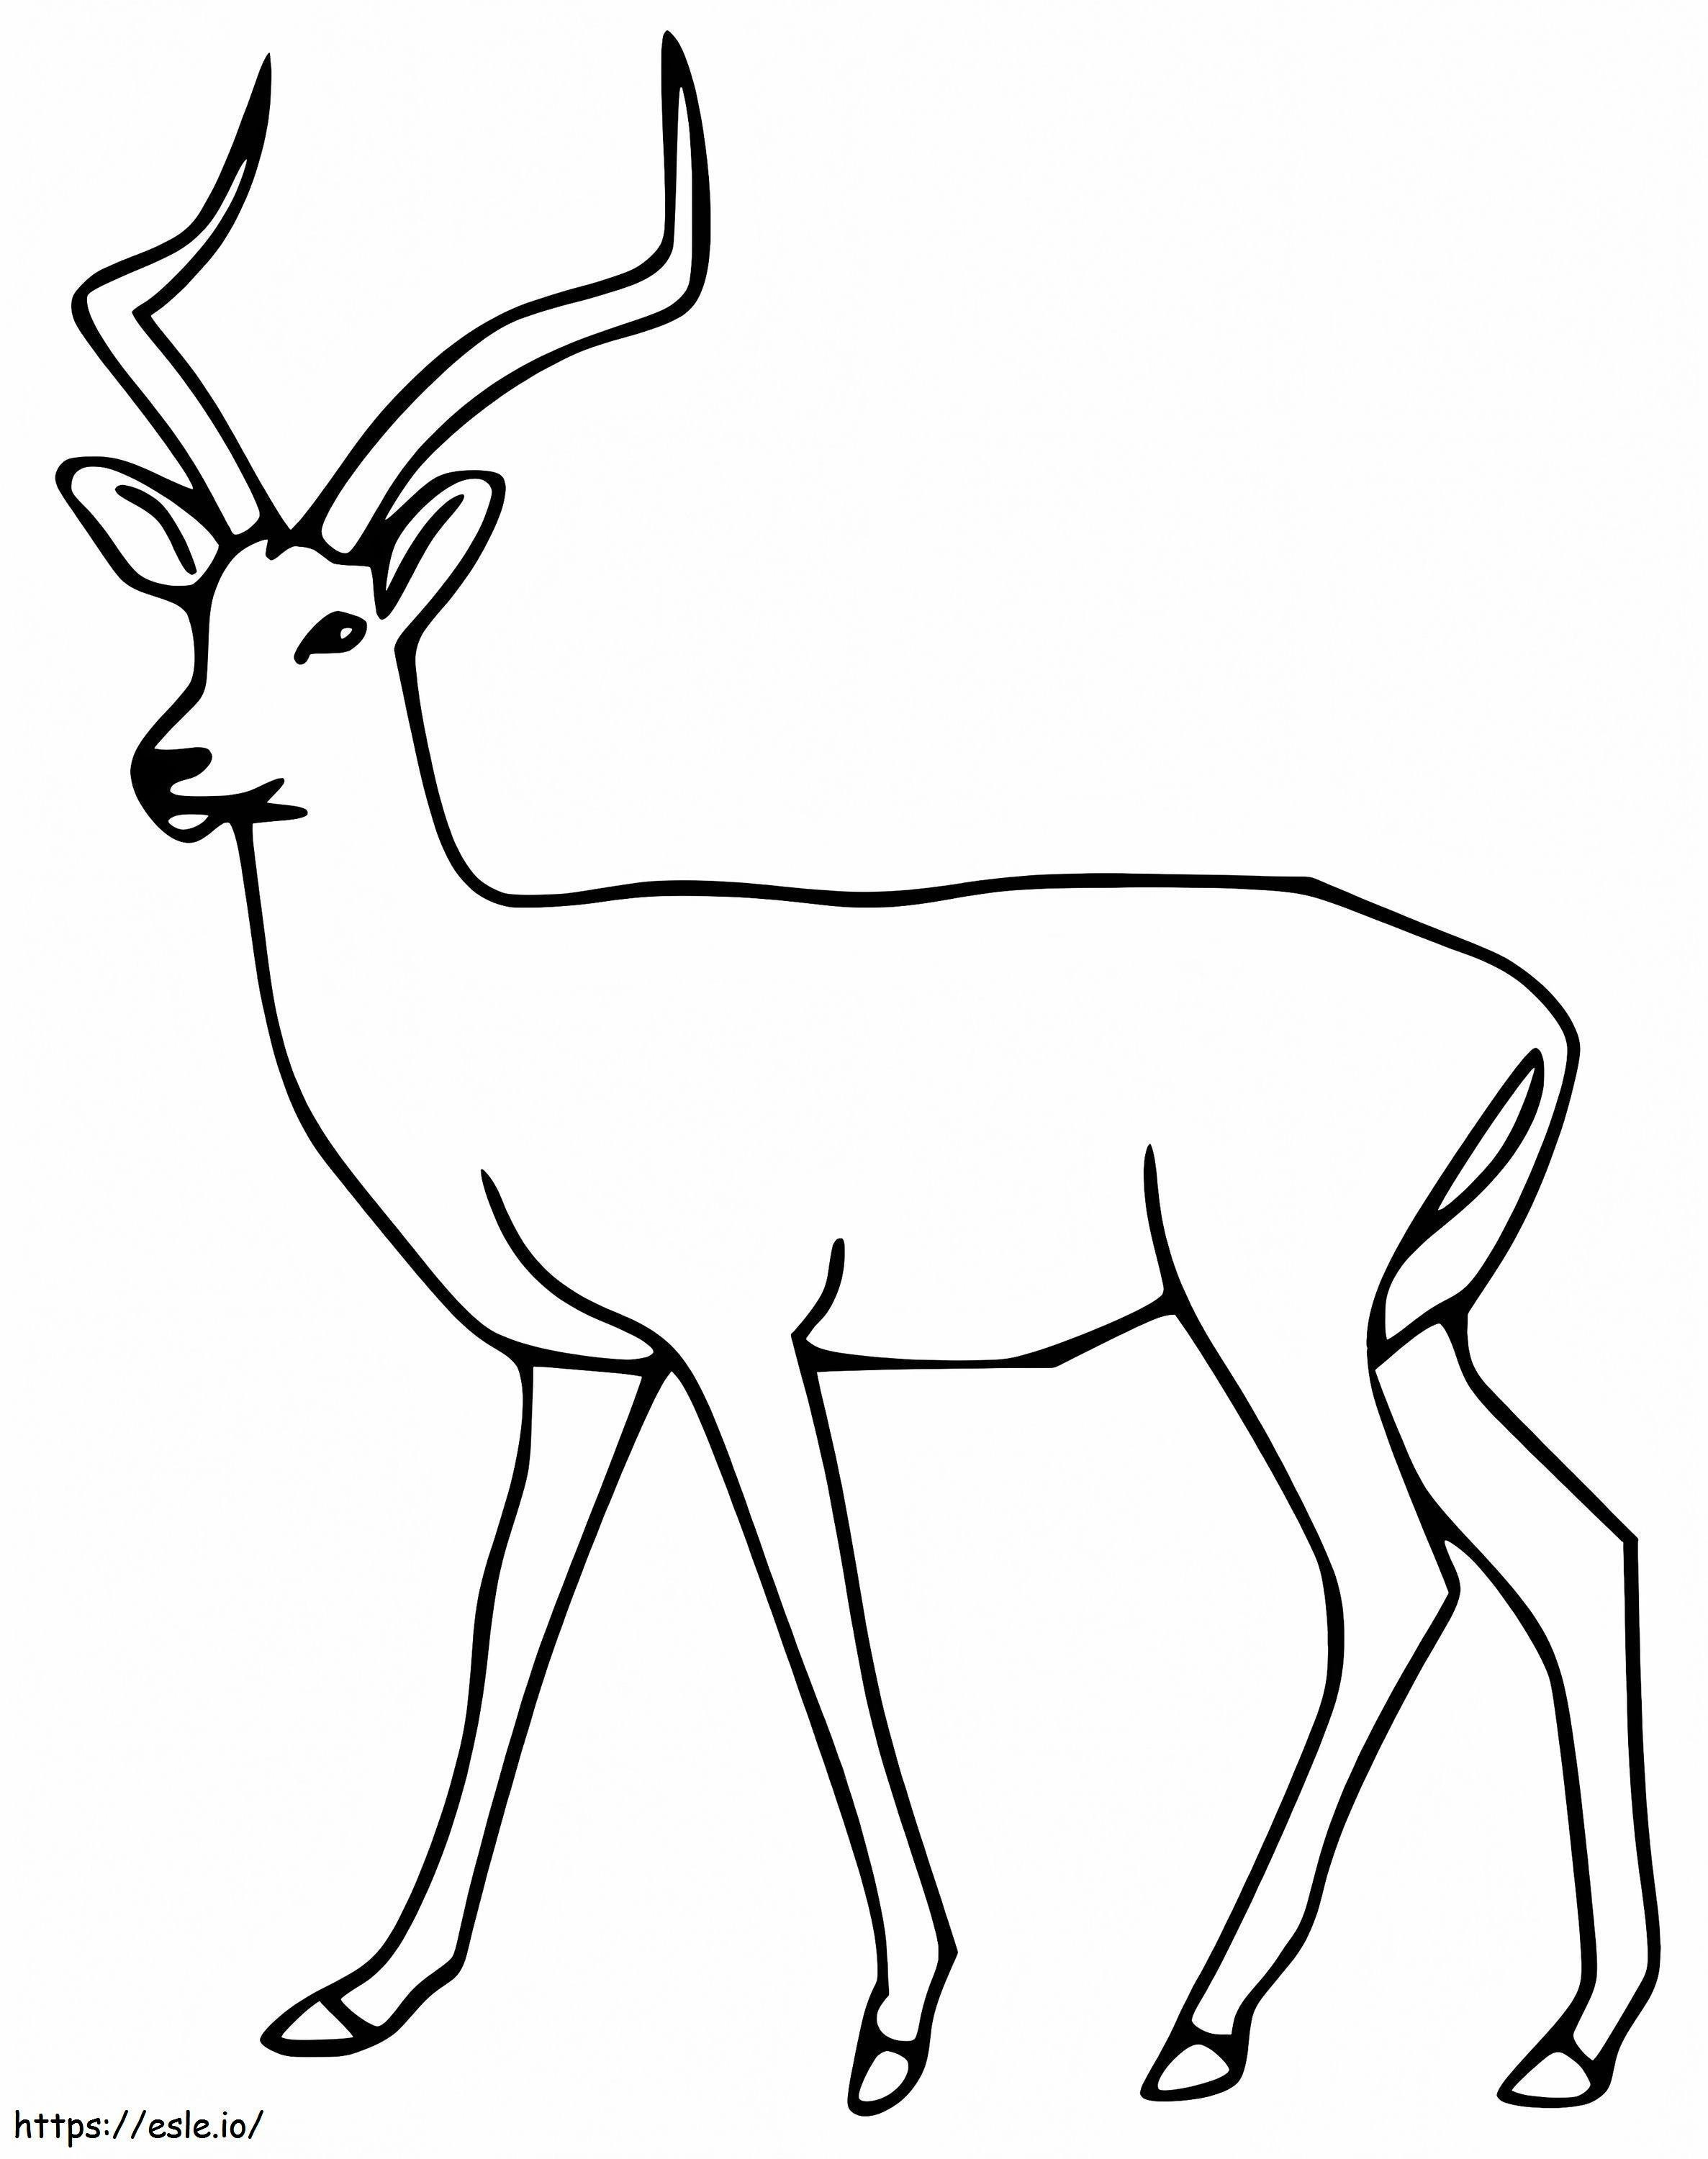 Simple Impala coloring page